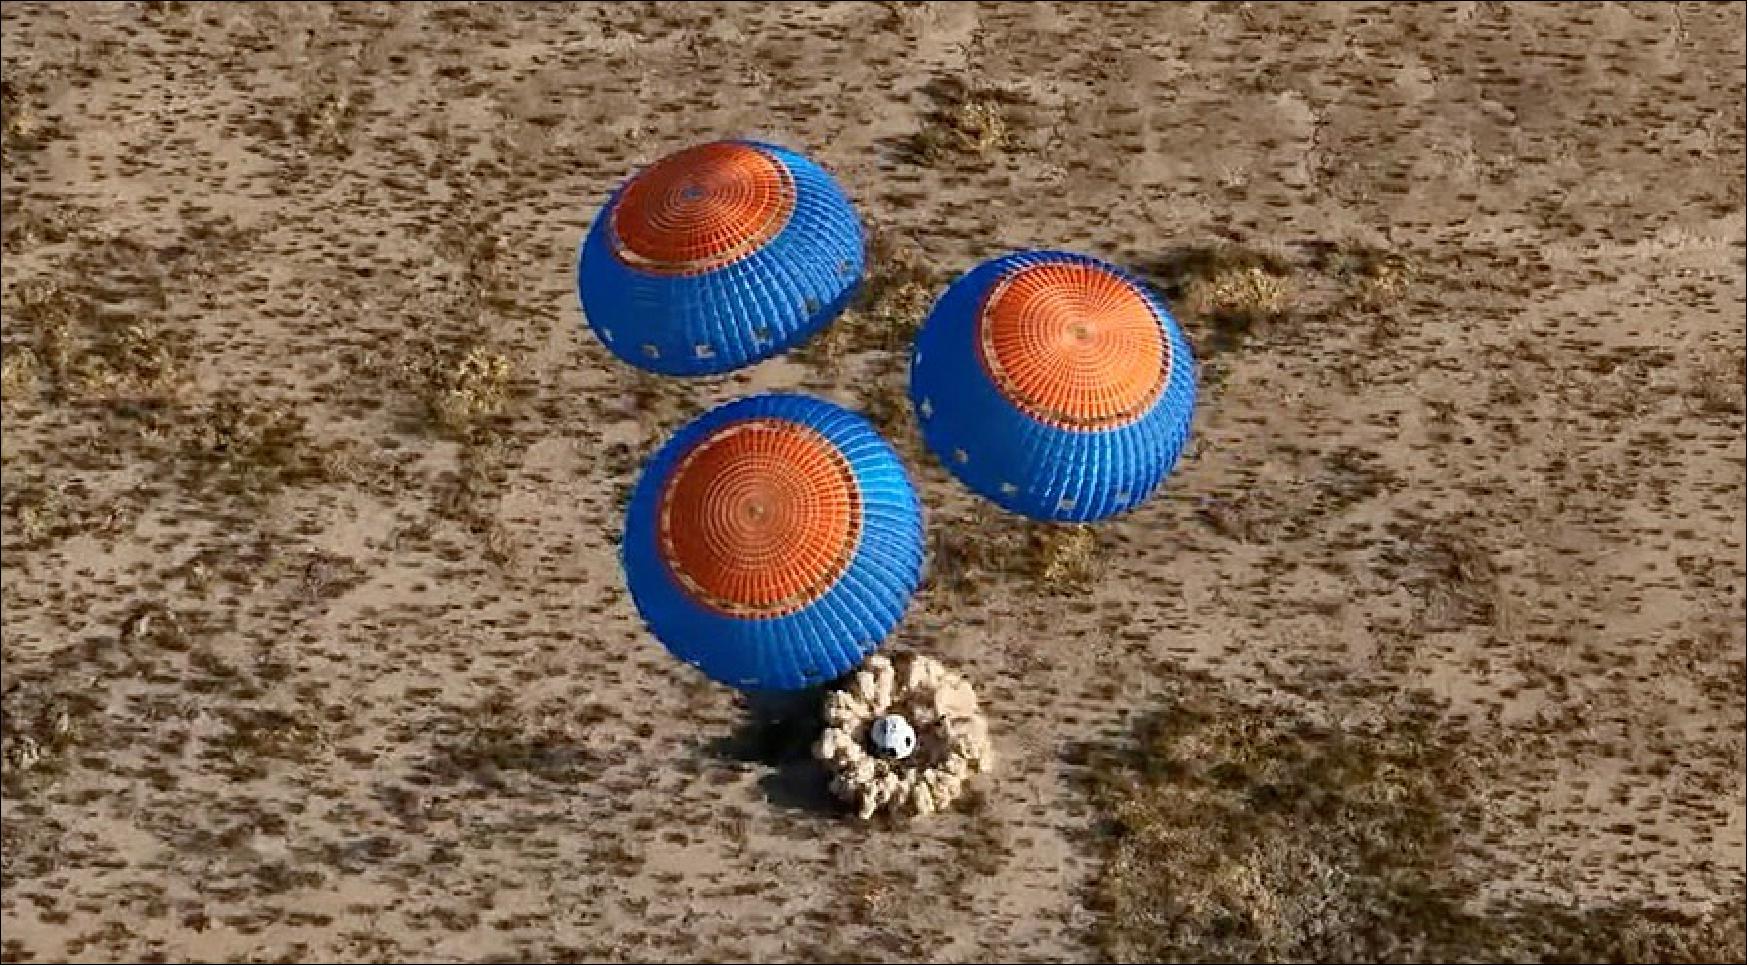 Figure 3: The New Shepard crew capsule touches down in the West Texas desert at the end of the NS-21 mission that launched June 4 (image credit: Blue Origin webcast)